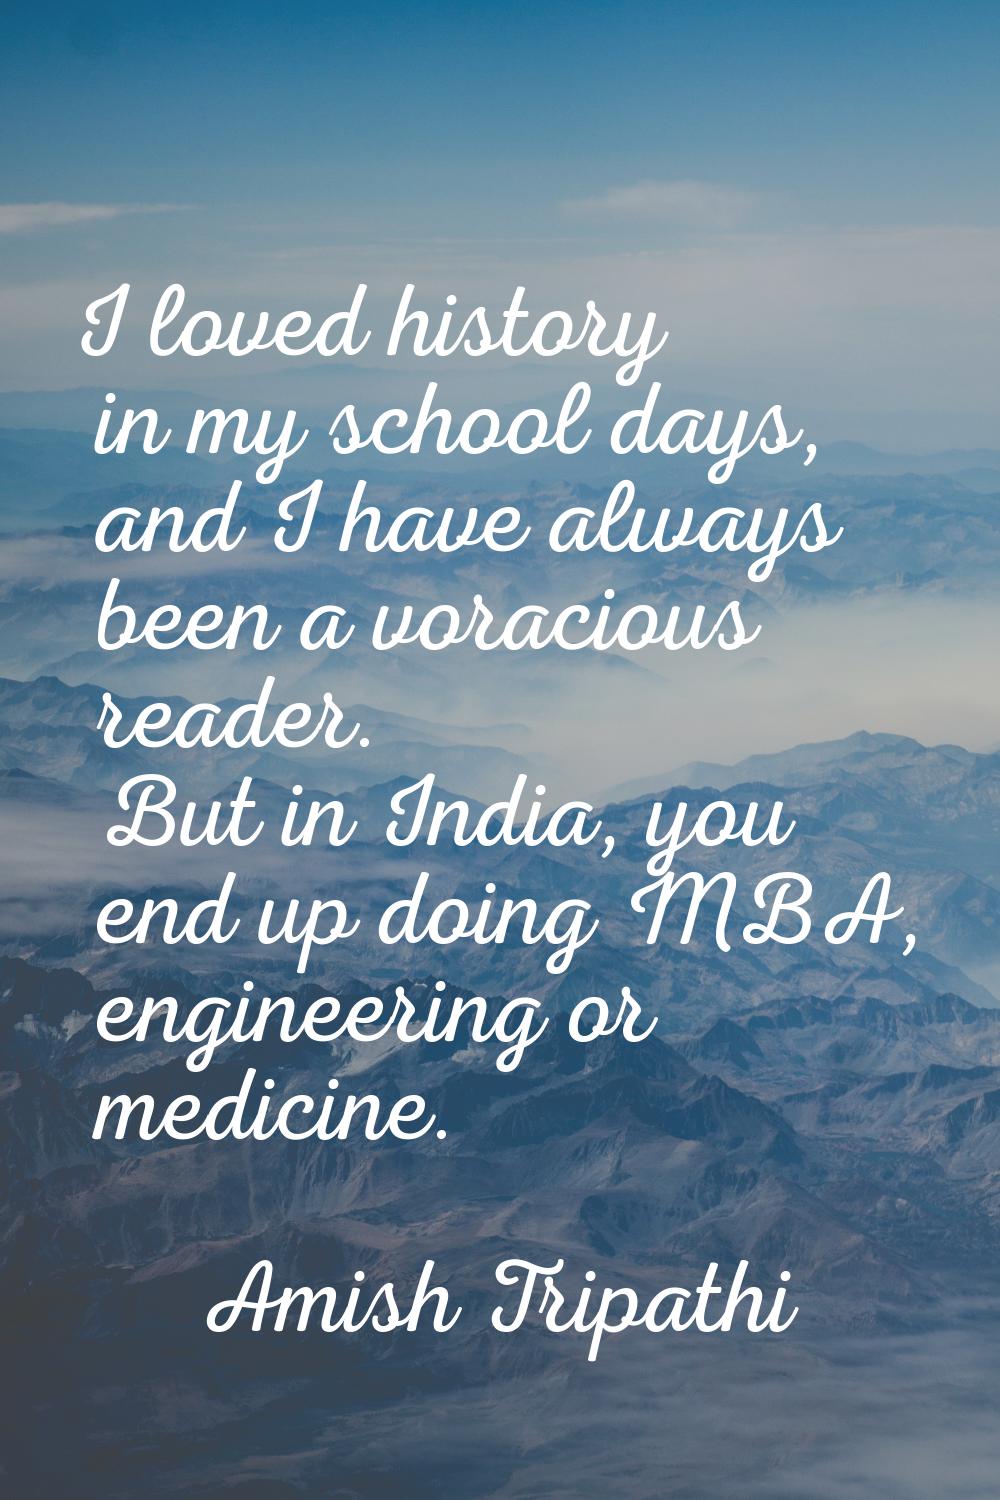 I loved history in my school days, and I have always been a voracious reader. But in India, you end